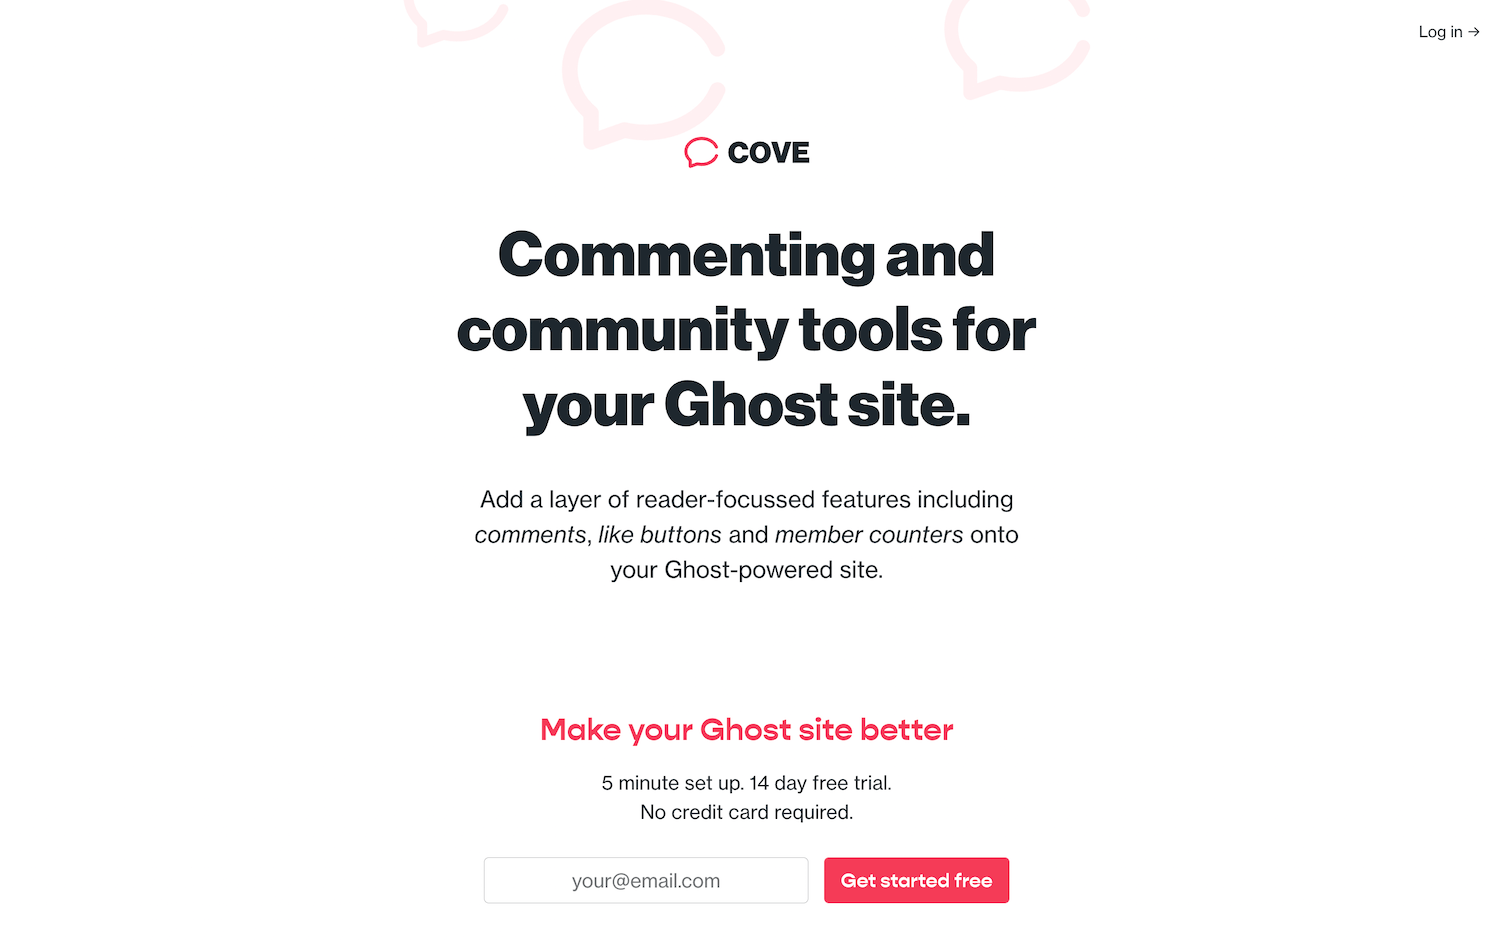 How to add comments to your Ghost site